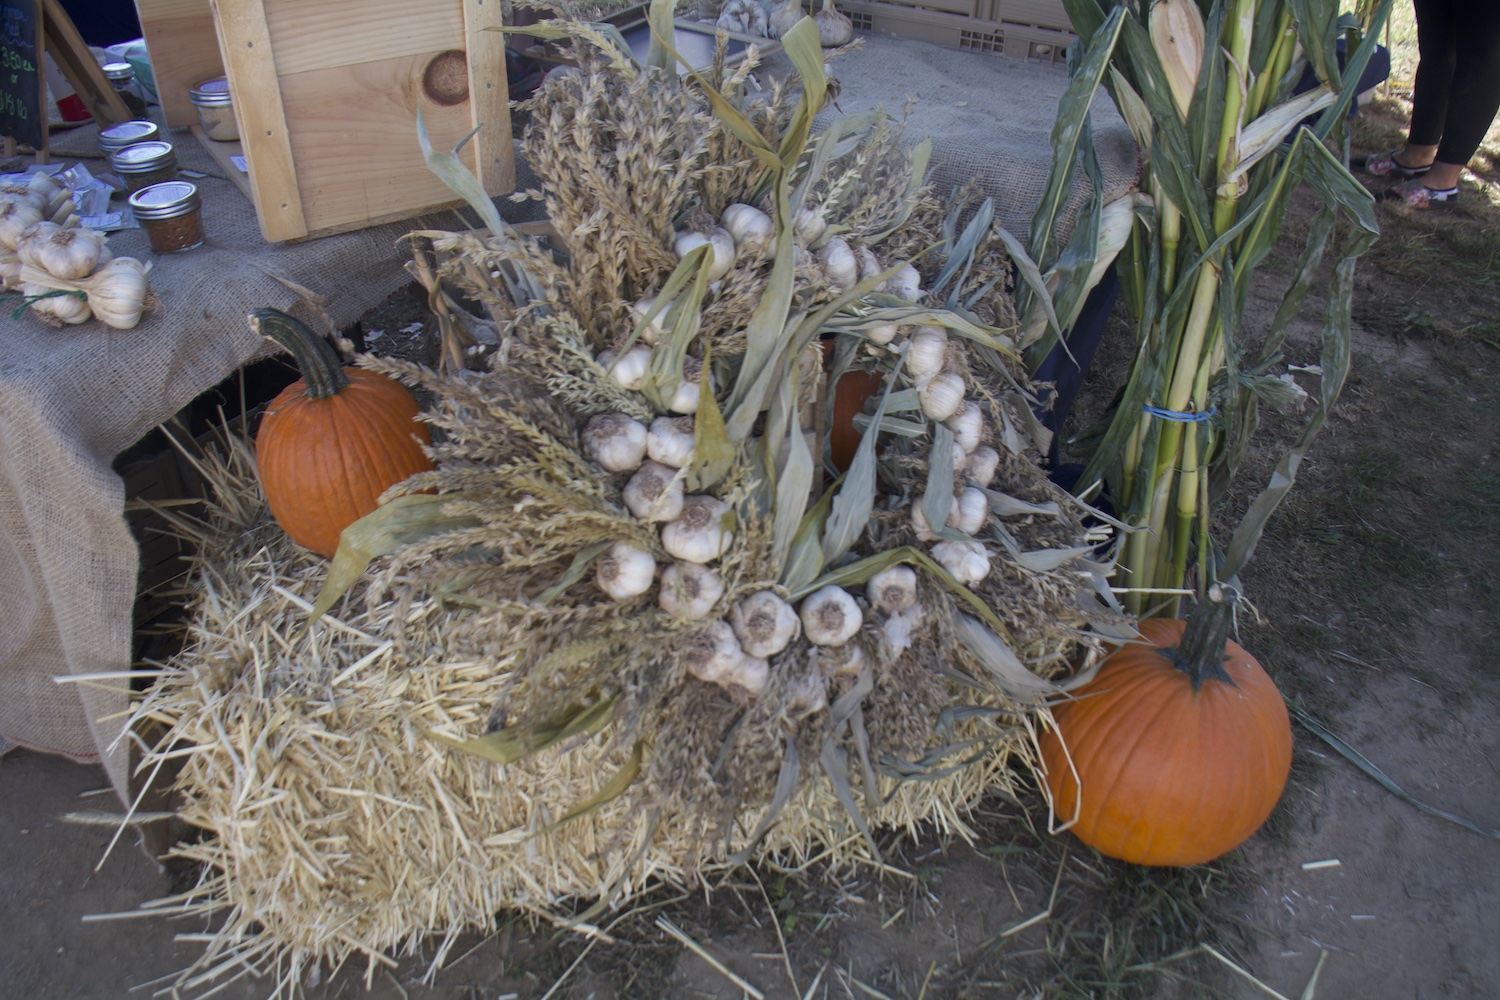 New Location For Long Island Garlic Festival at Waterdrinker Farm This